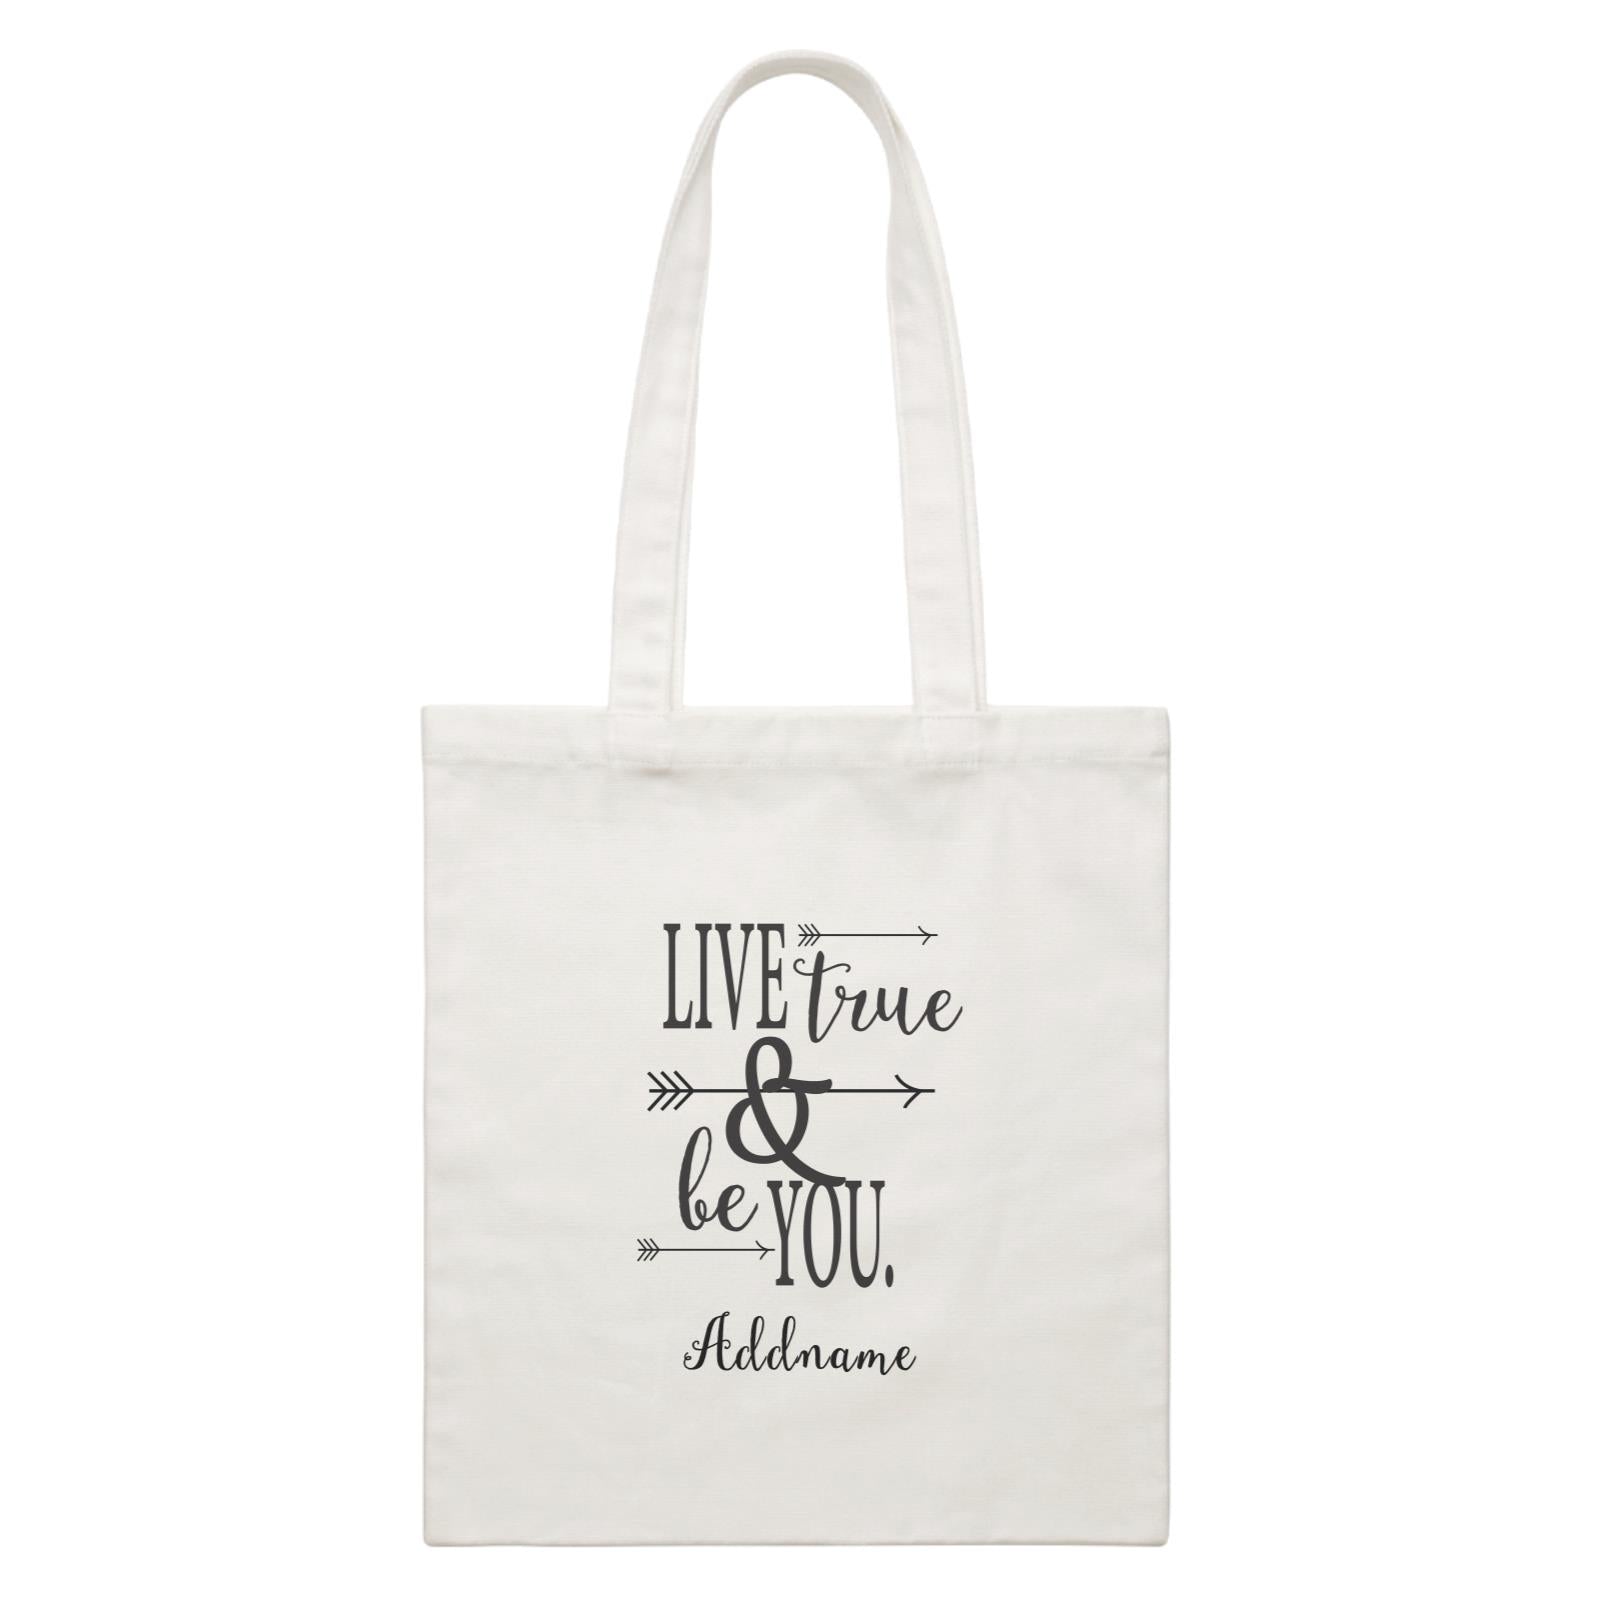 Inspiration Quotes Live True And Be You Addname White Canvas Bag